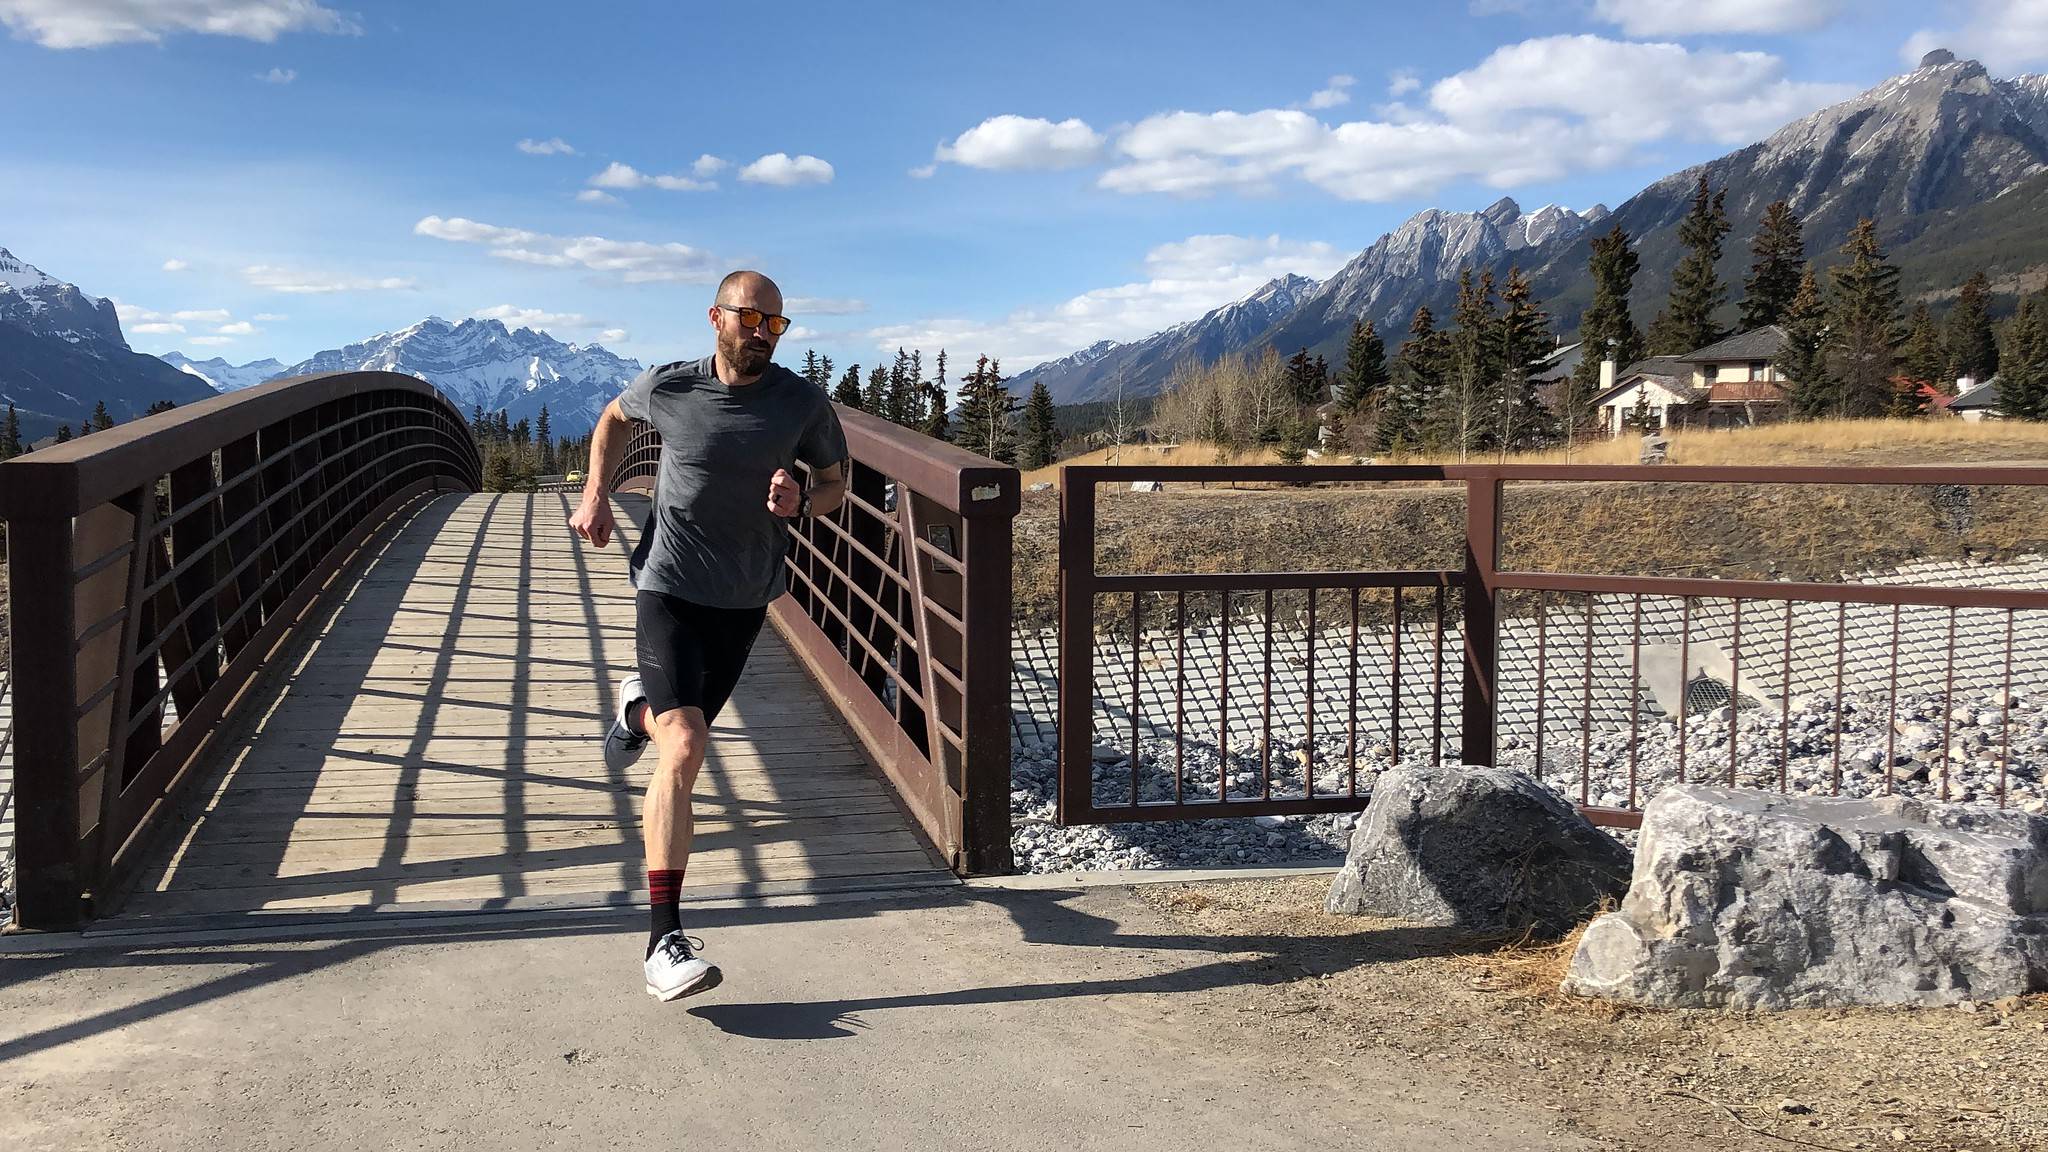 Man running across a bridge with a scenic backdrop of mountains.